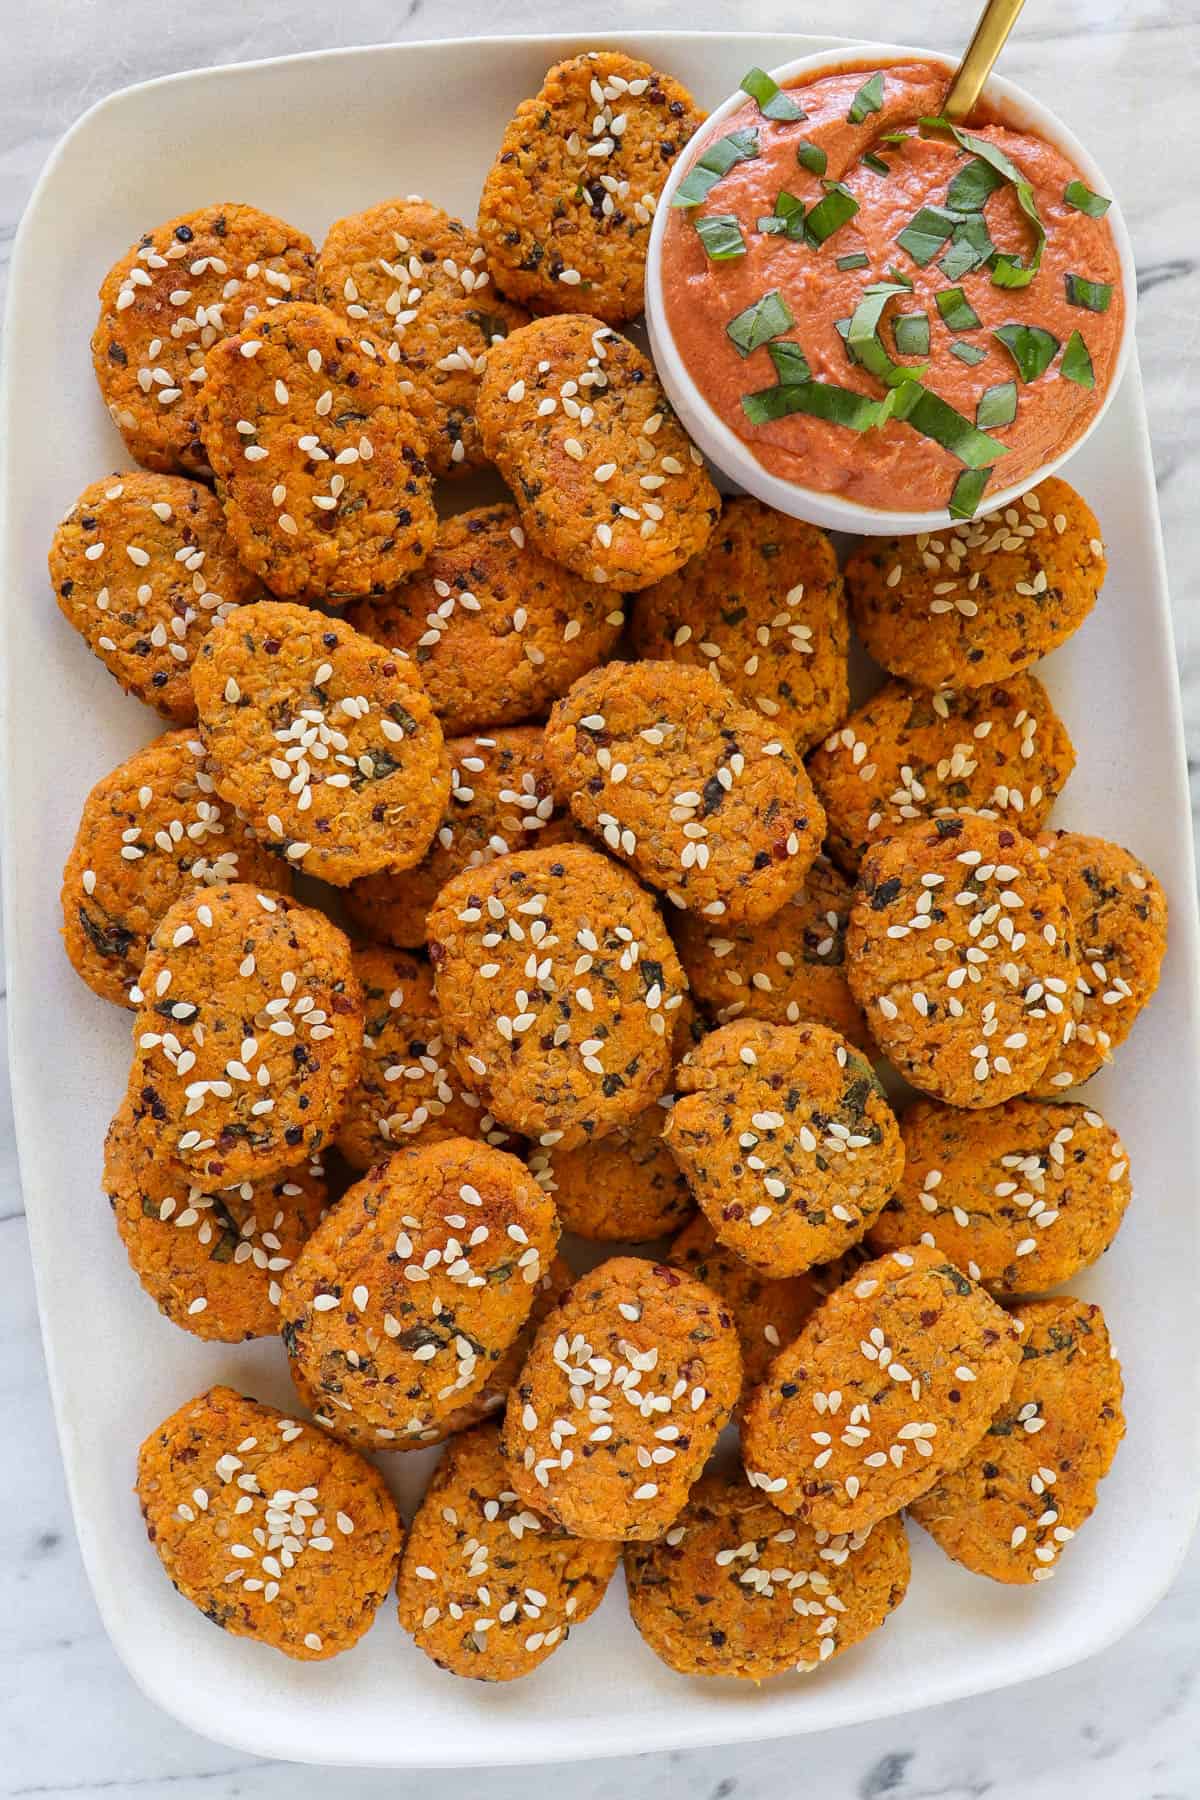 Sweet potato bites on long plate with creamy tomato dip with a gold spoon.